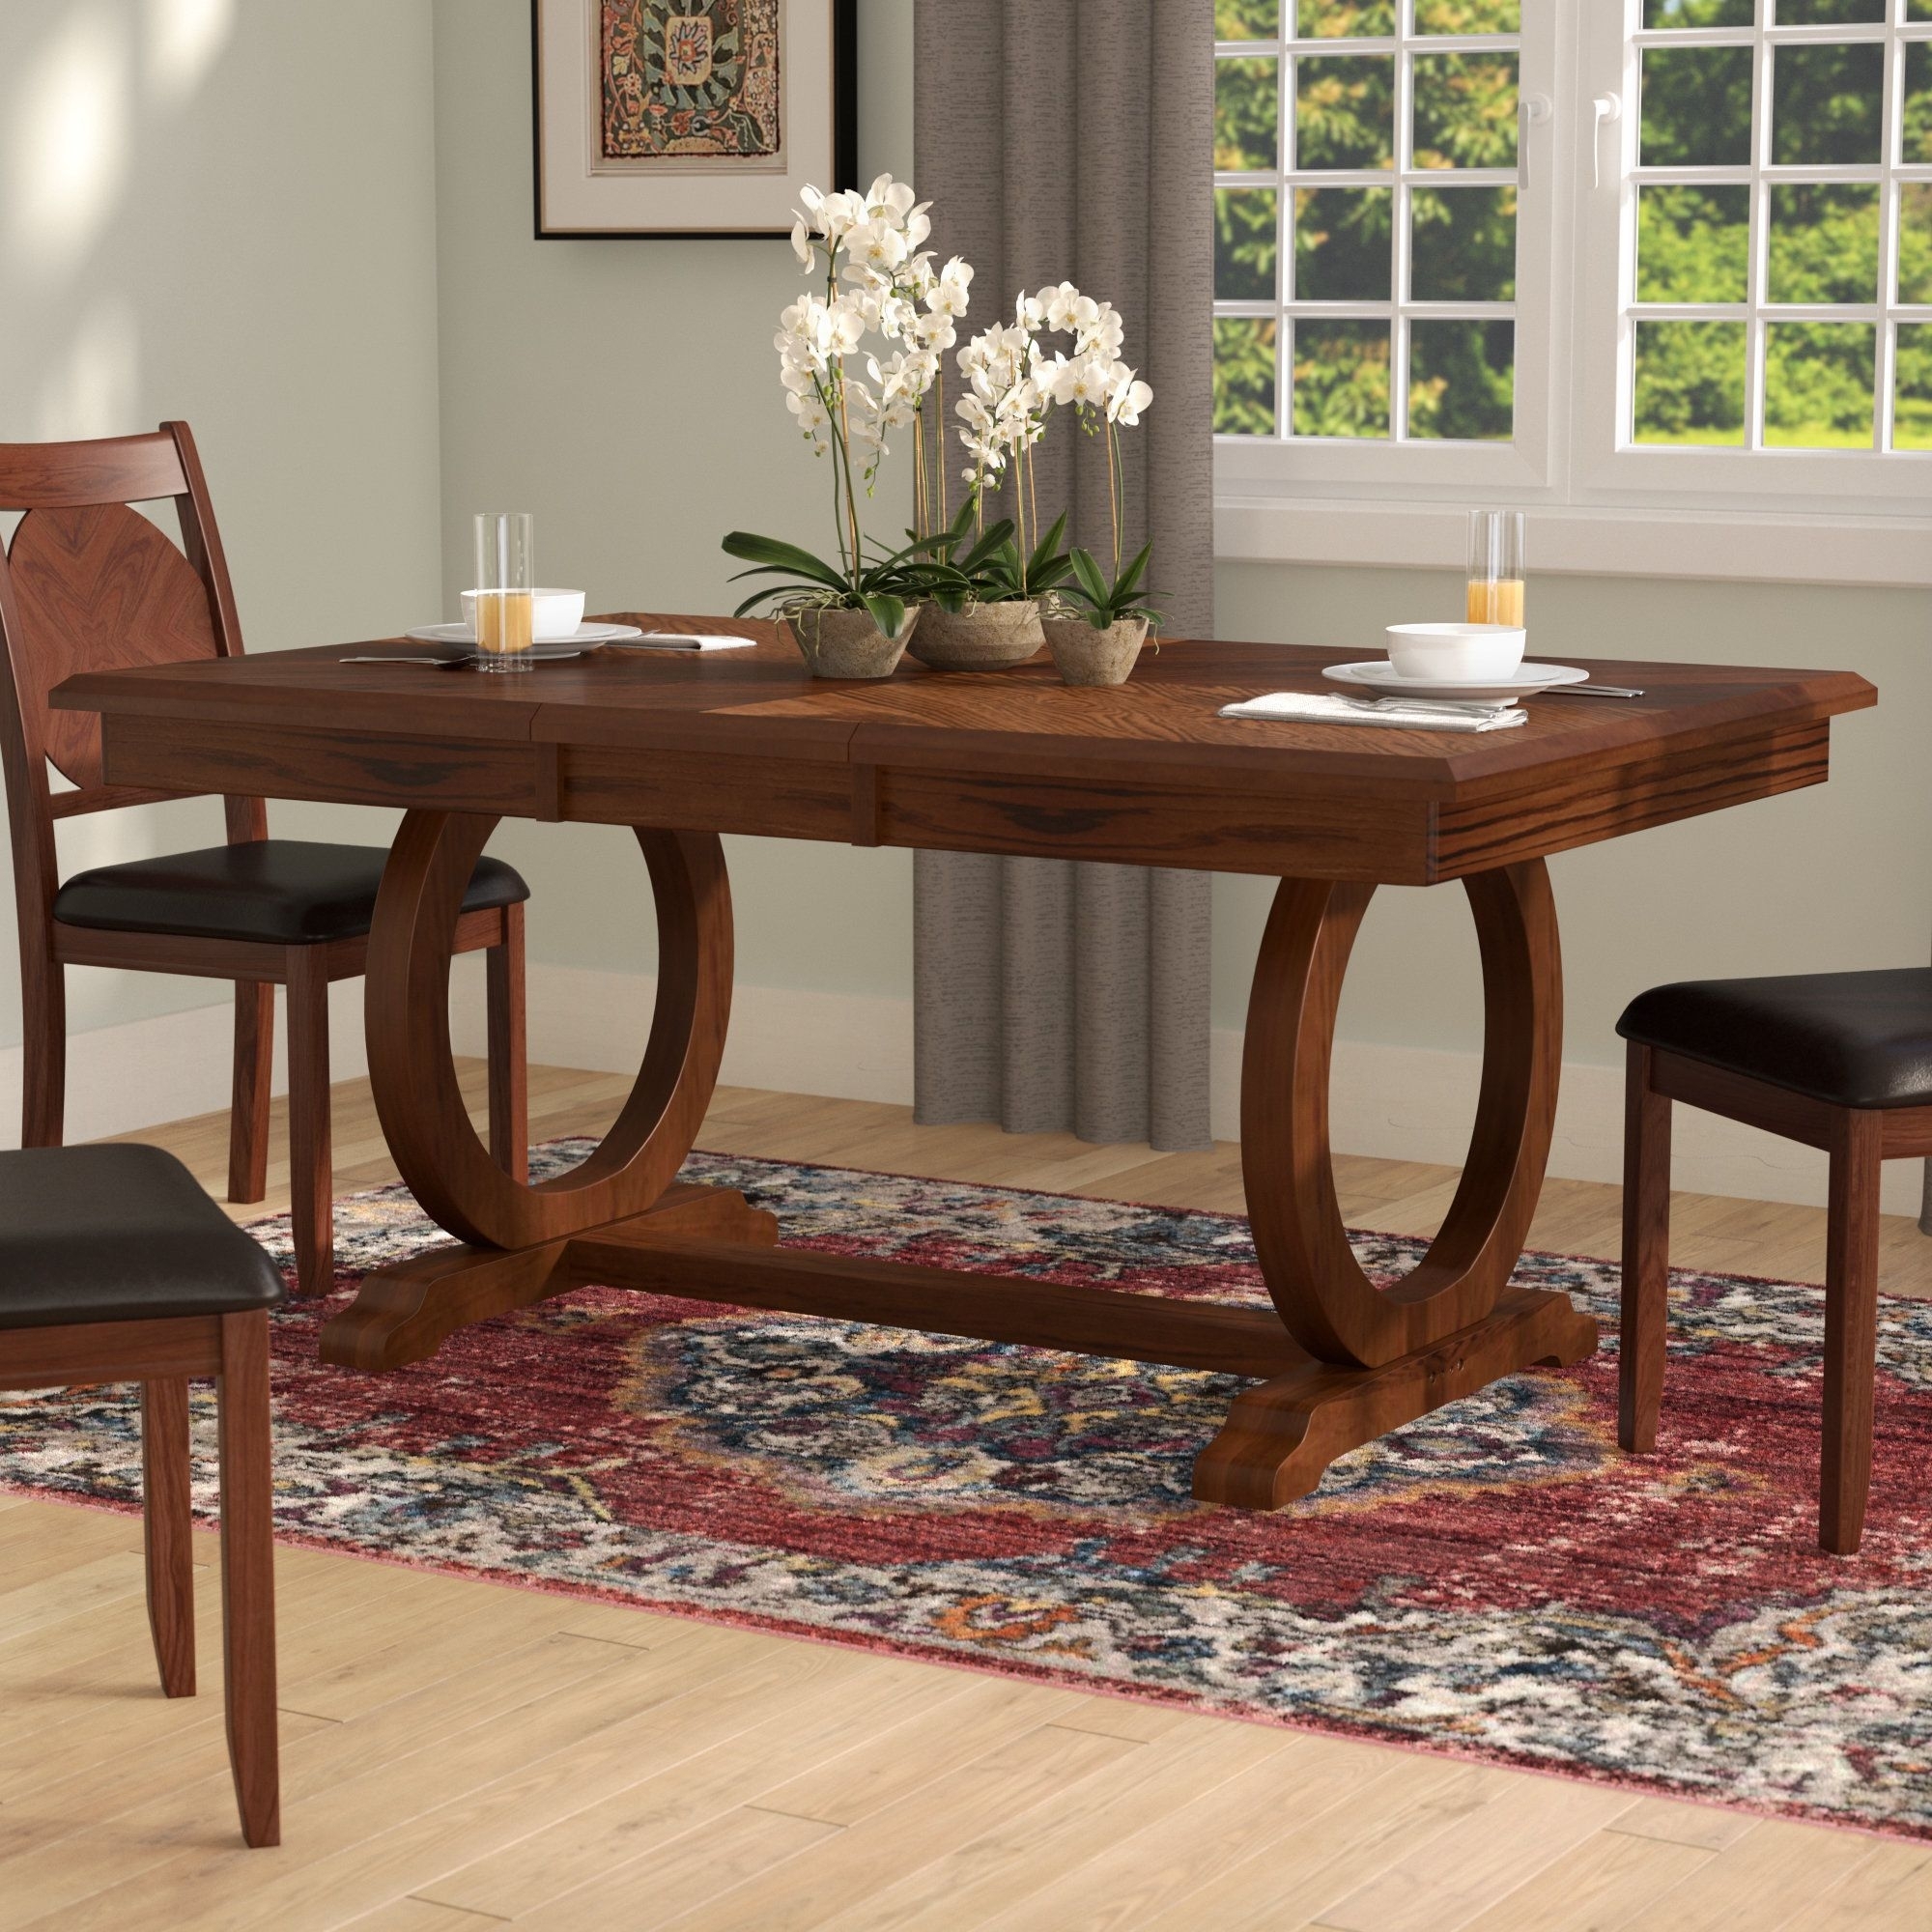 Dining Table On Casters You Ll Love In 2021 Visualhunt